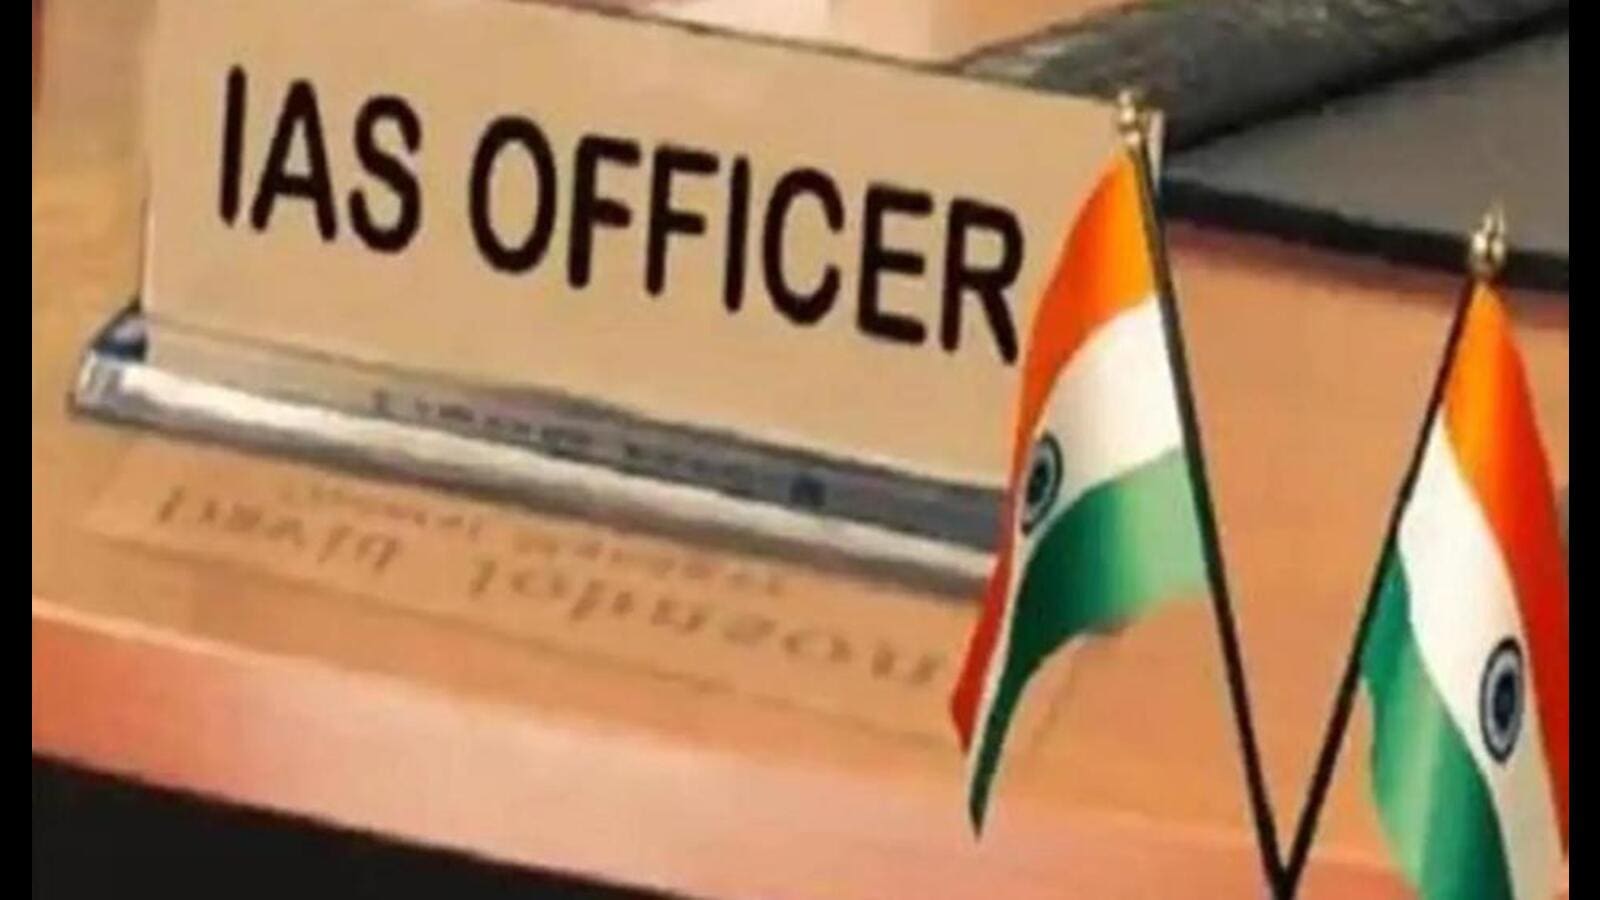 Himachal Pradesh govt transfers 13 IAS officers, with immediate effect |  Mint